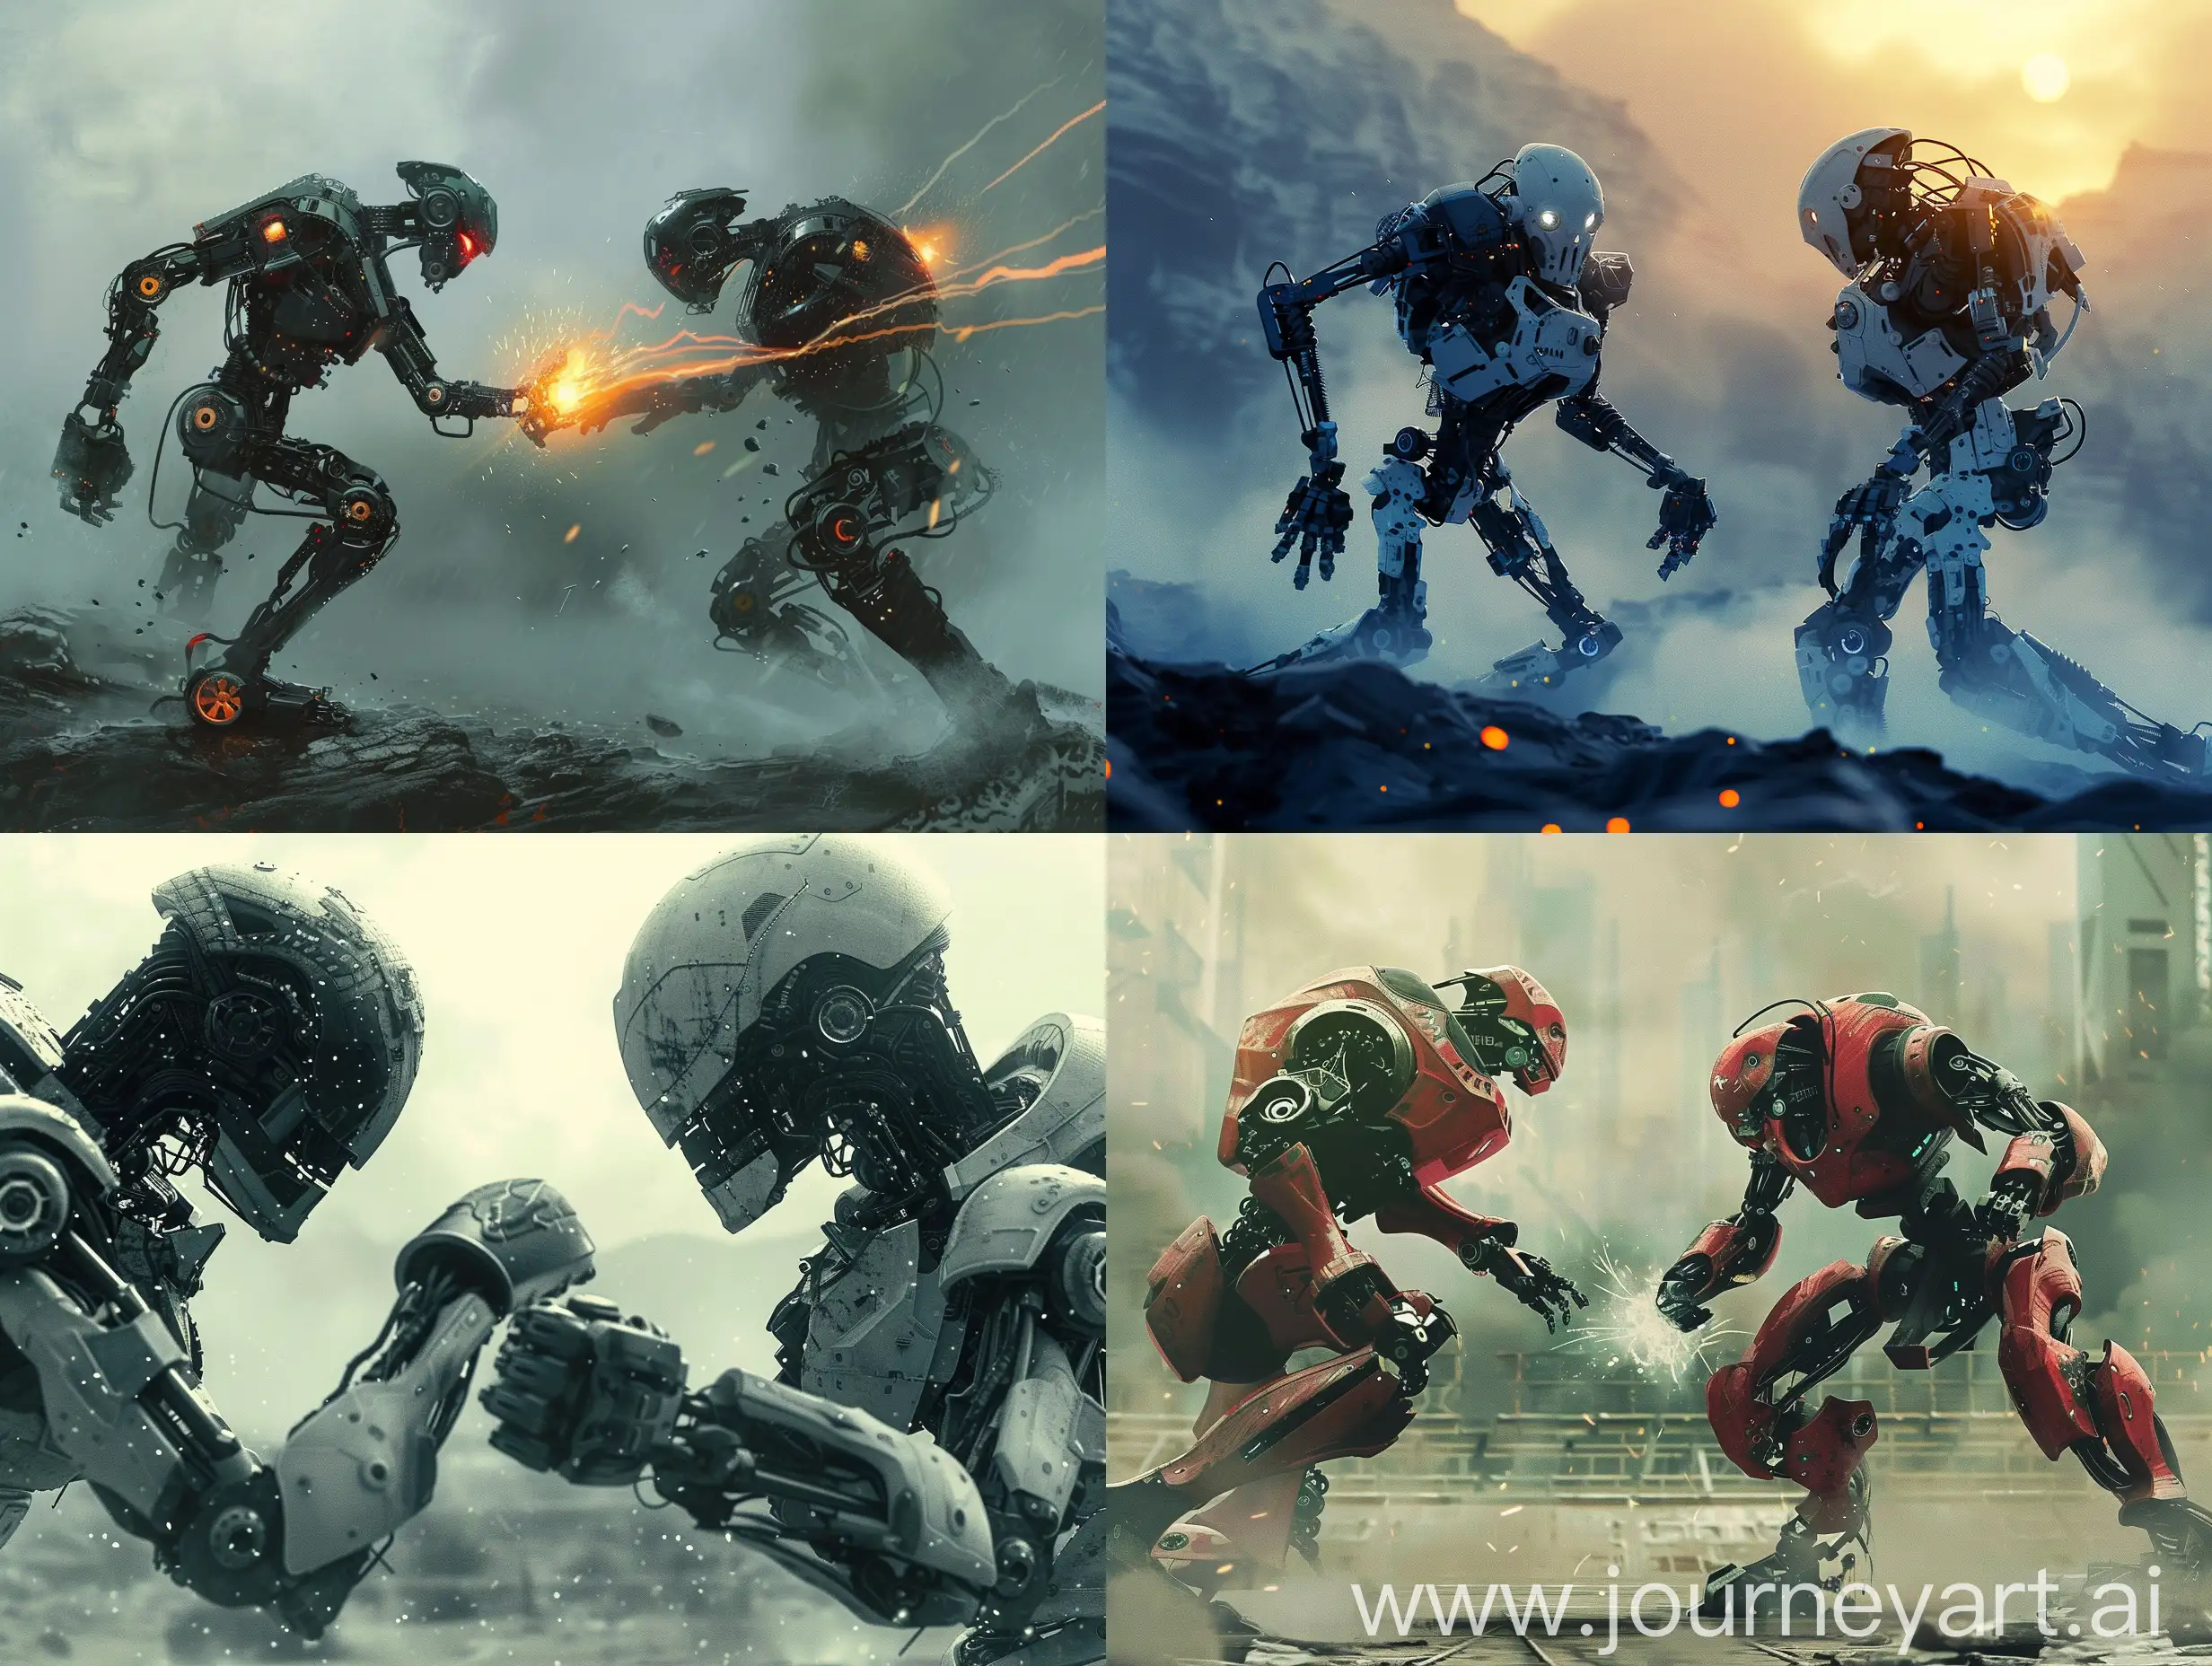 Epic-SciFi-Battle-of-Two-Robots-with-High-Contrast